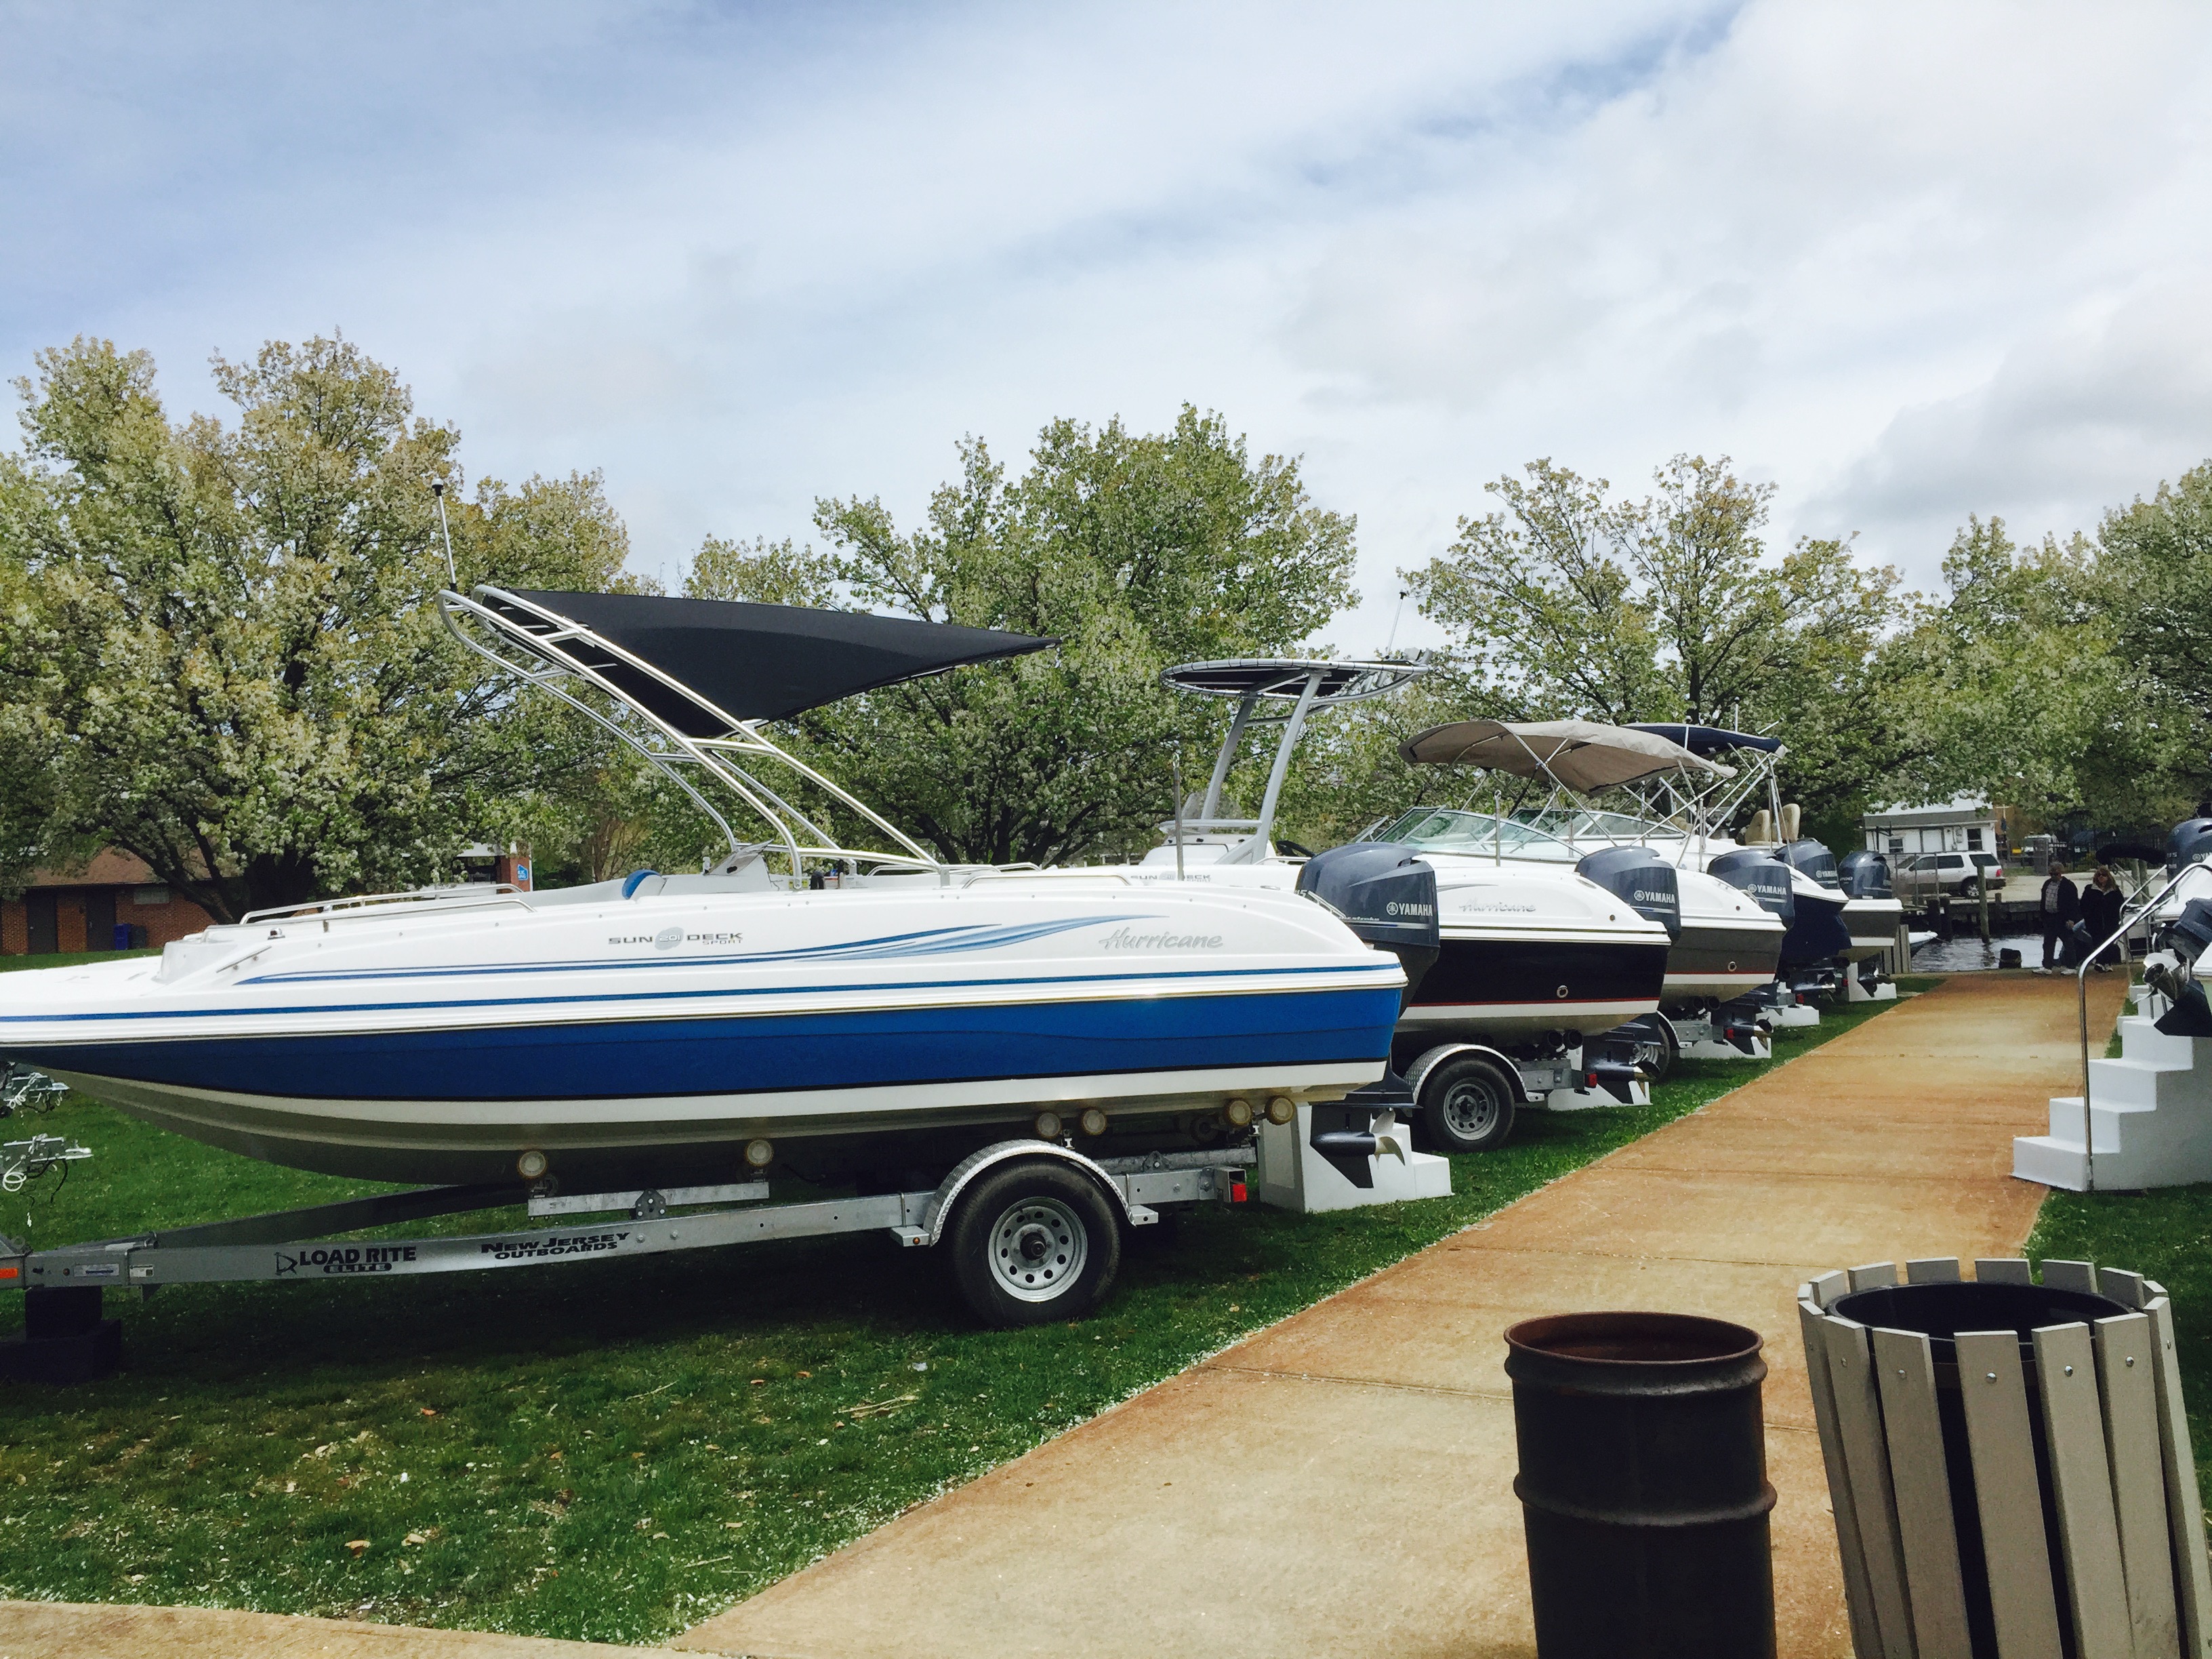 Our row of Hurricanes at the 2015 spring boat show